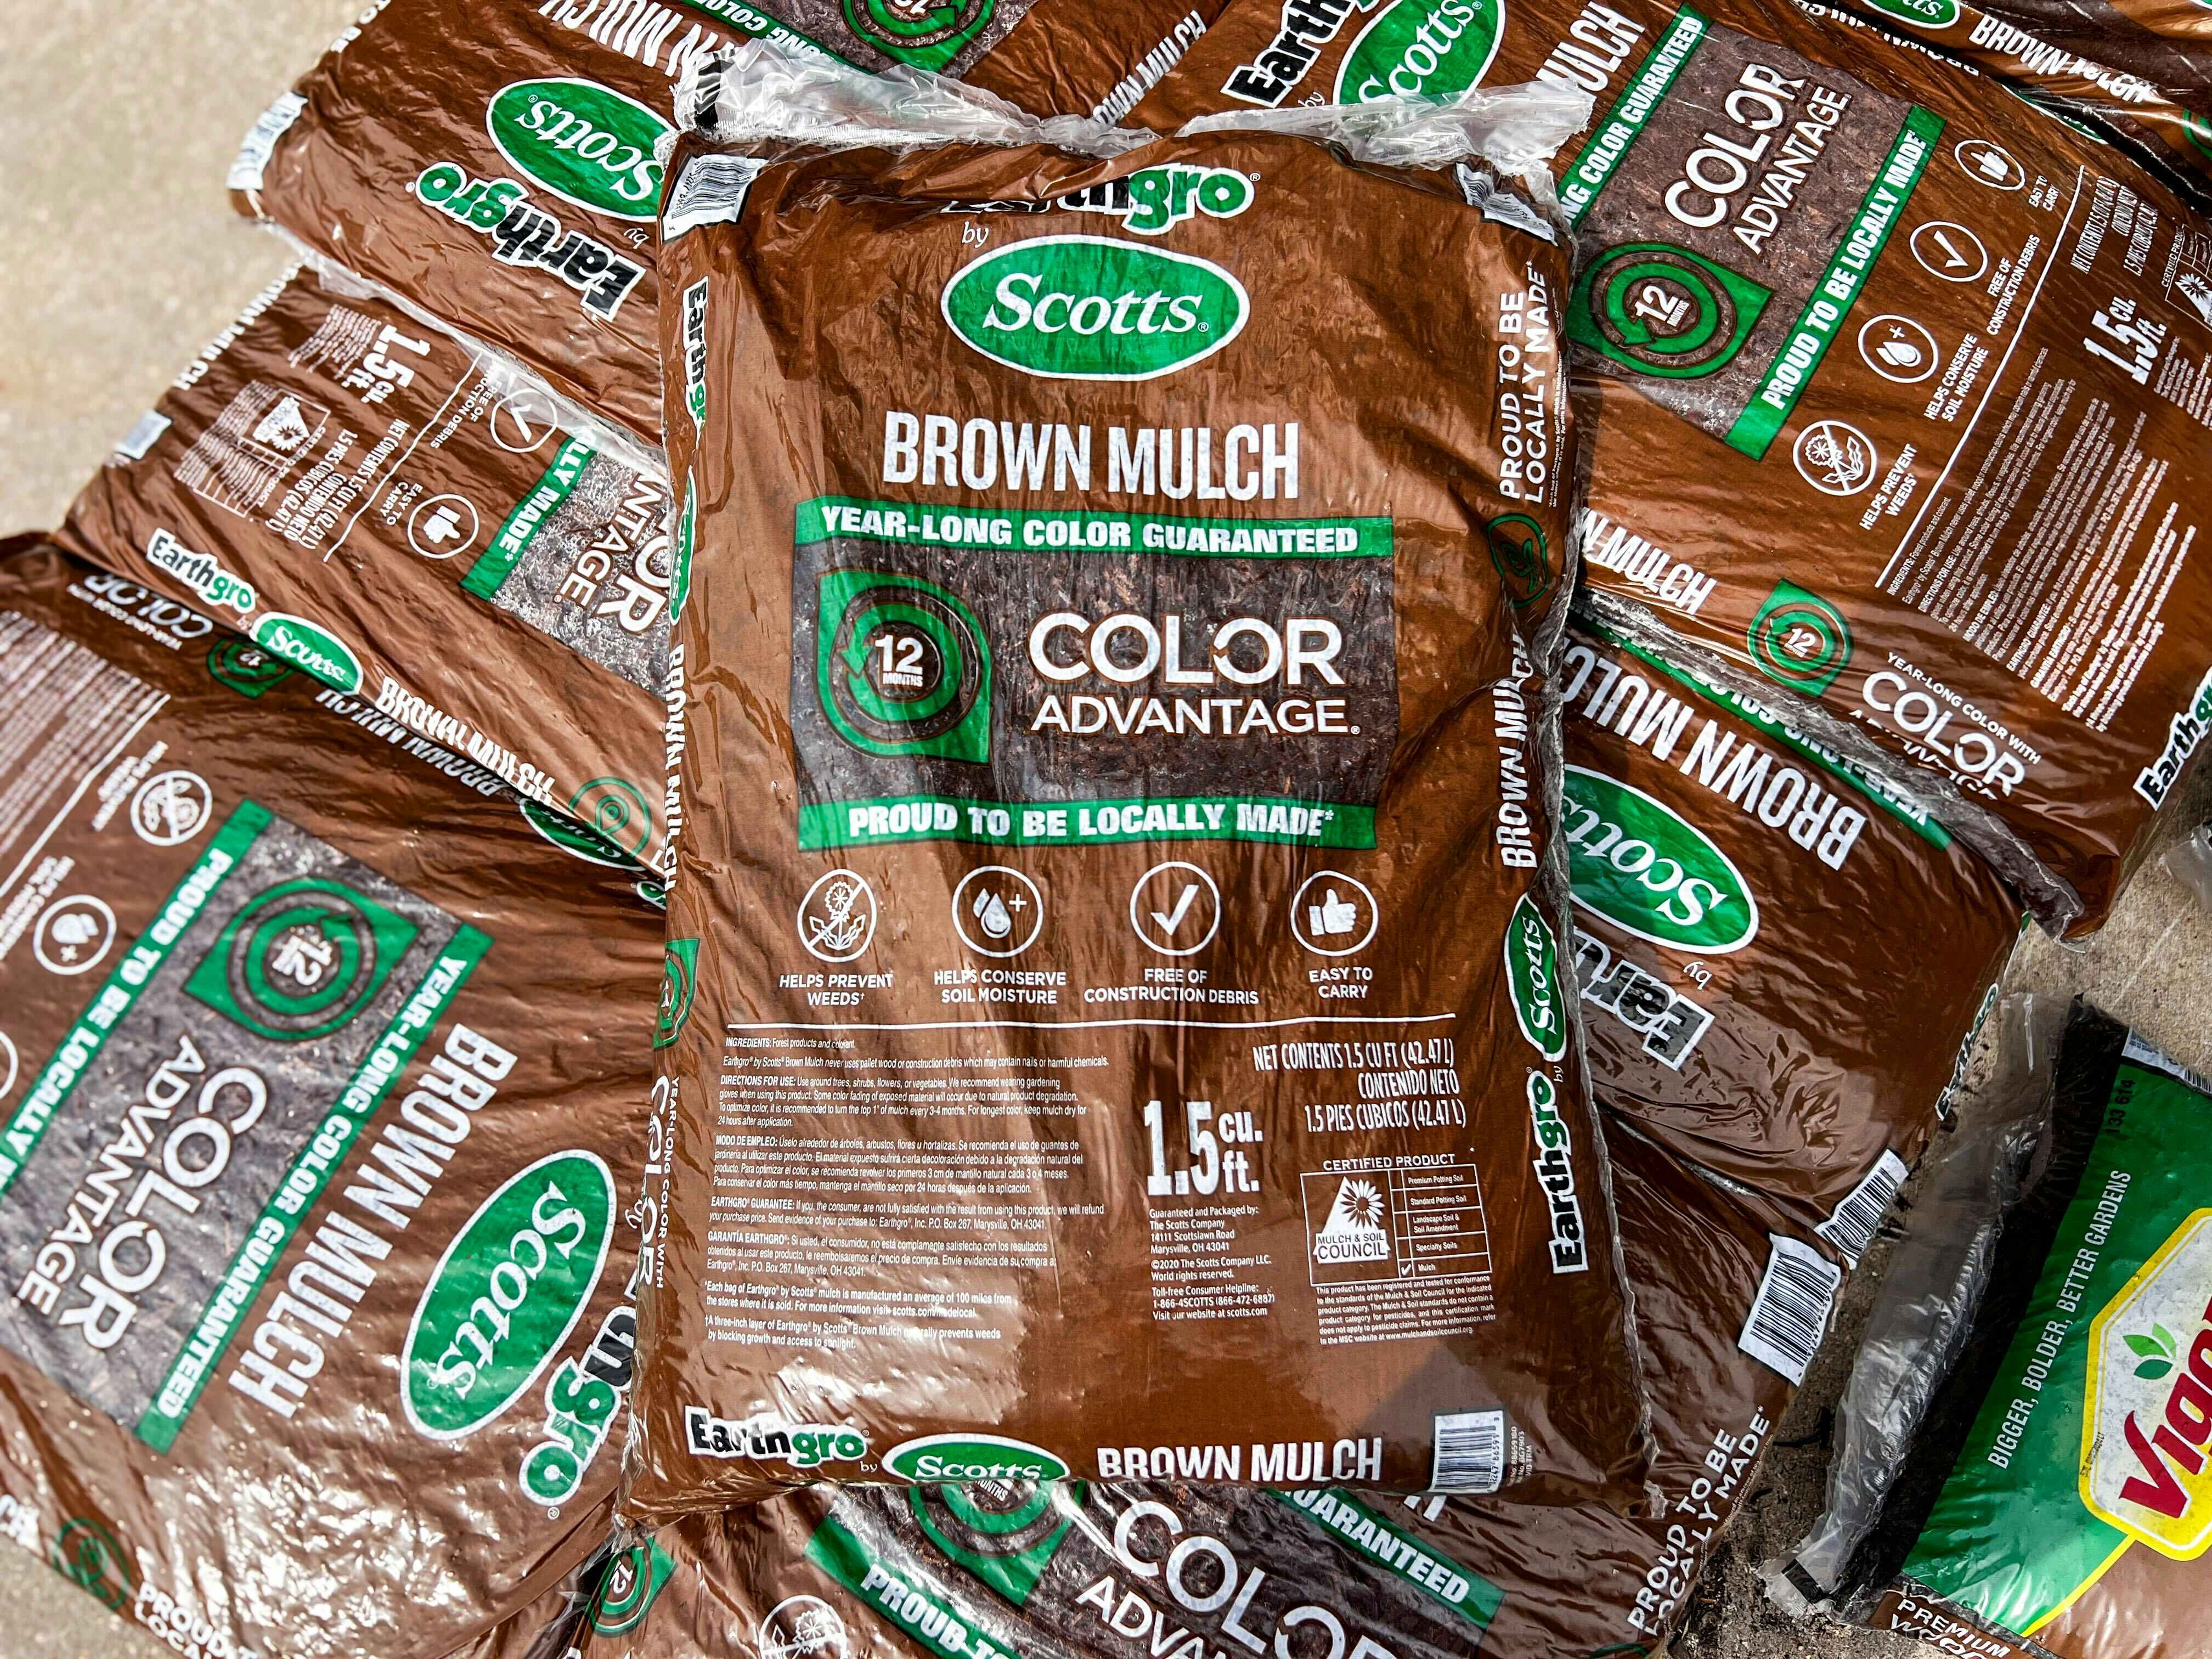 Pay Just $2 for Scotts Earthgro Mulch at Home Depot